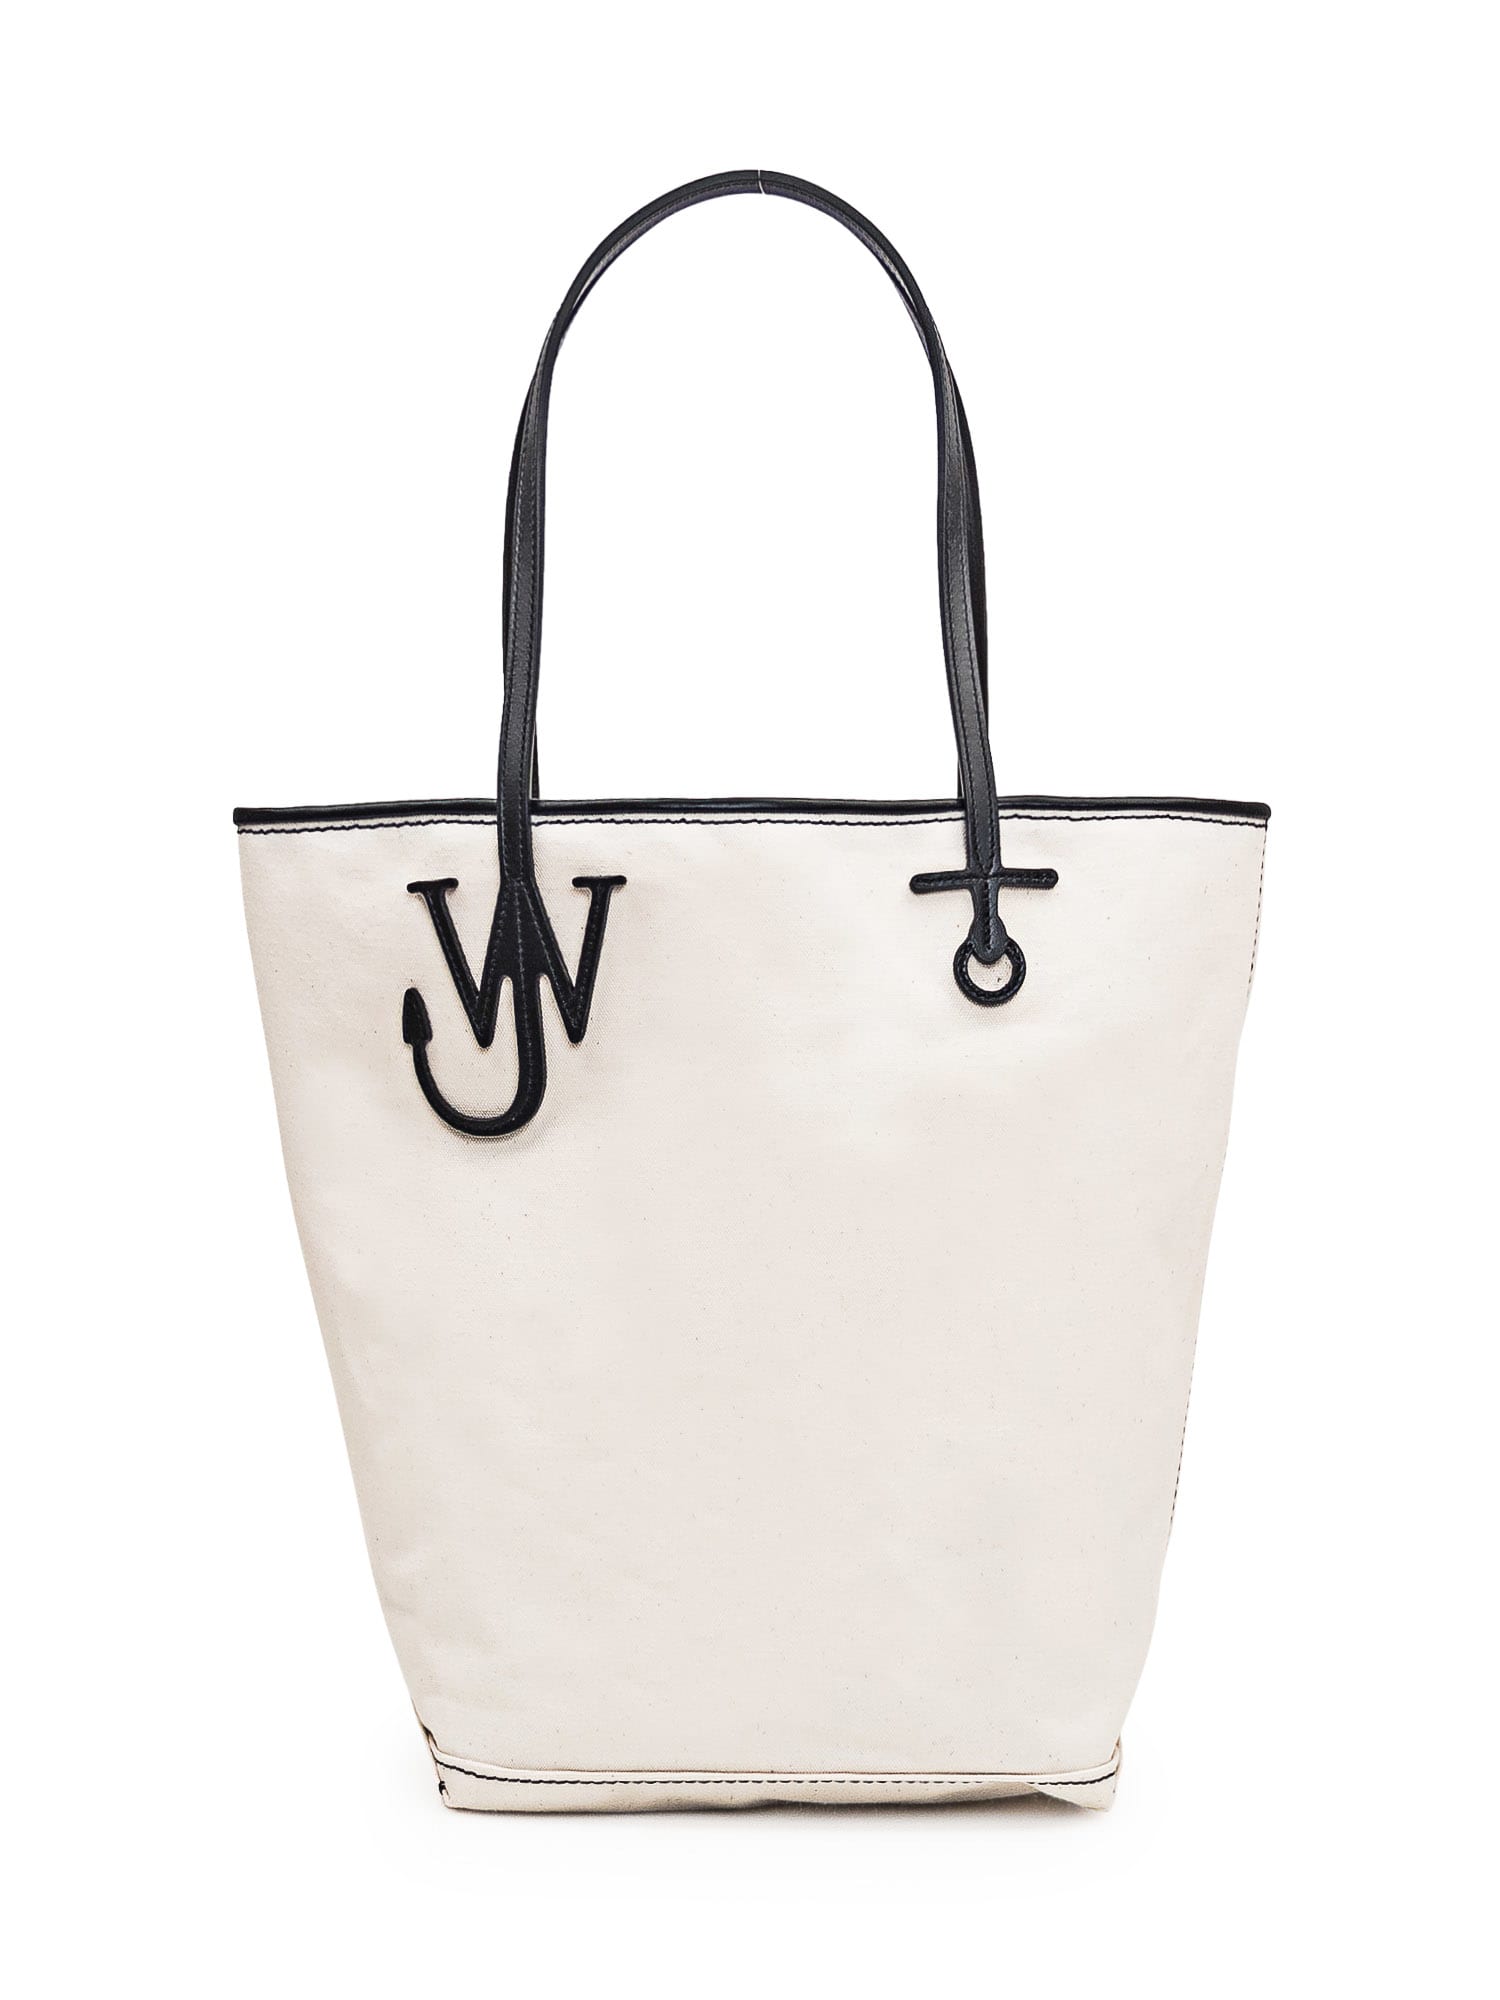 Jw Anderson Anchor Tote Bag In Natural/black